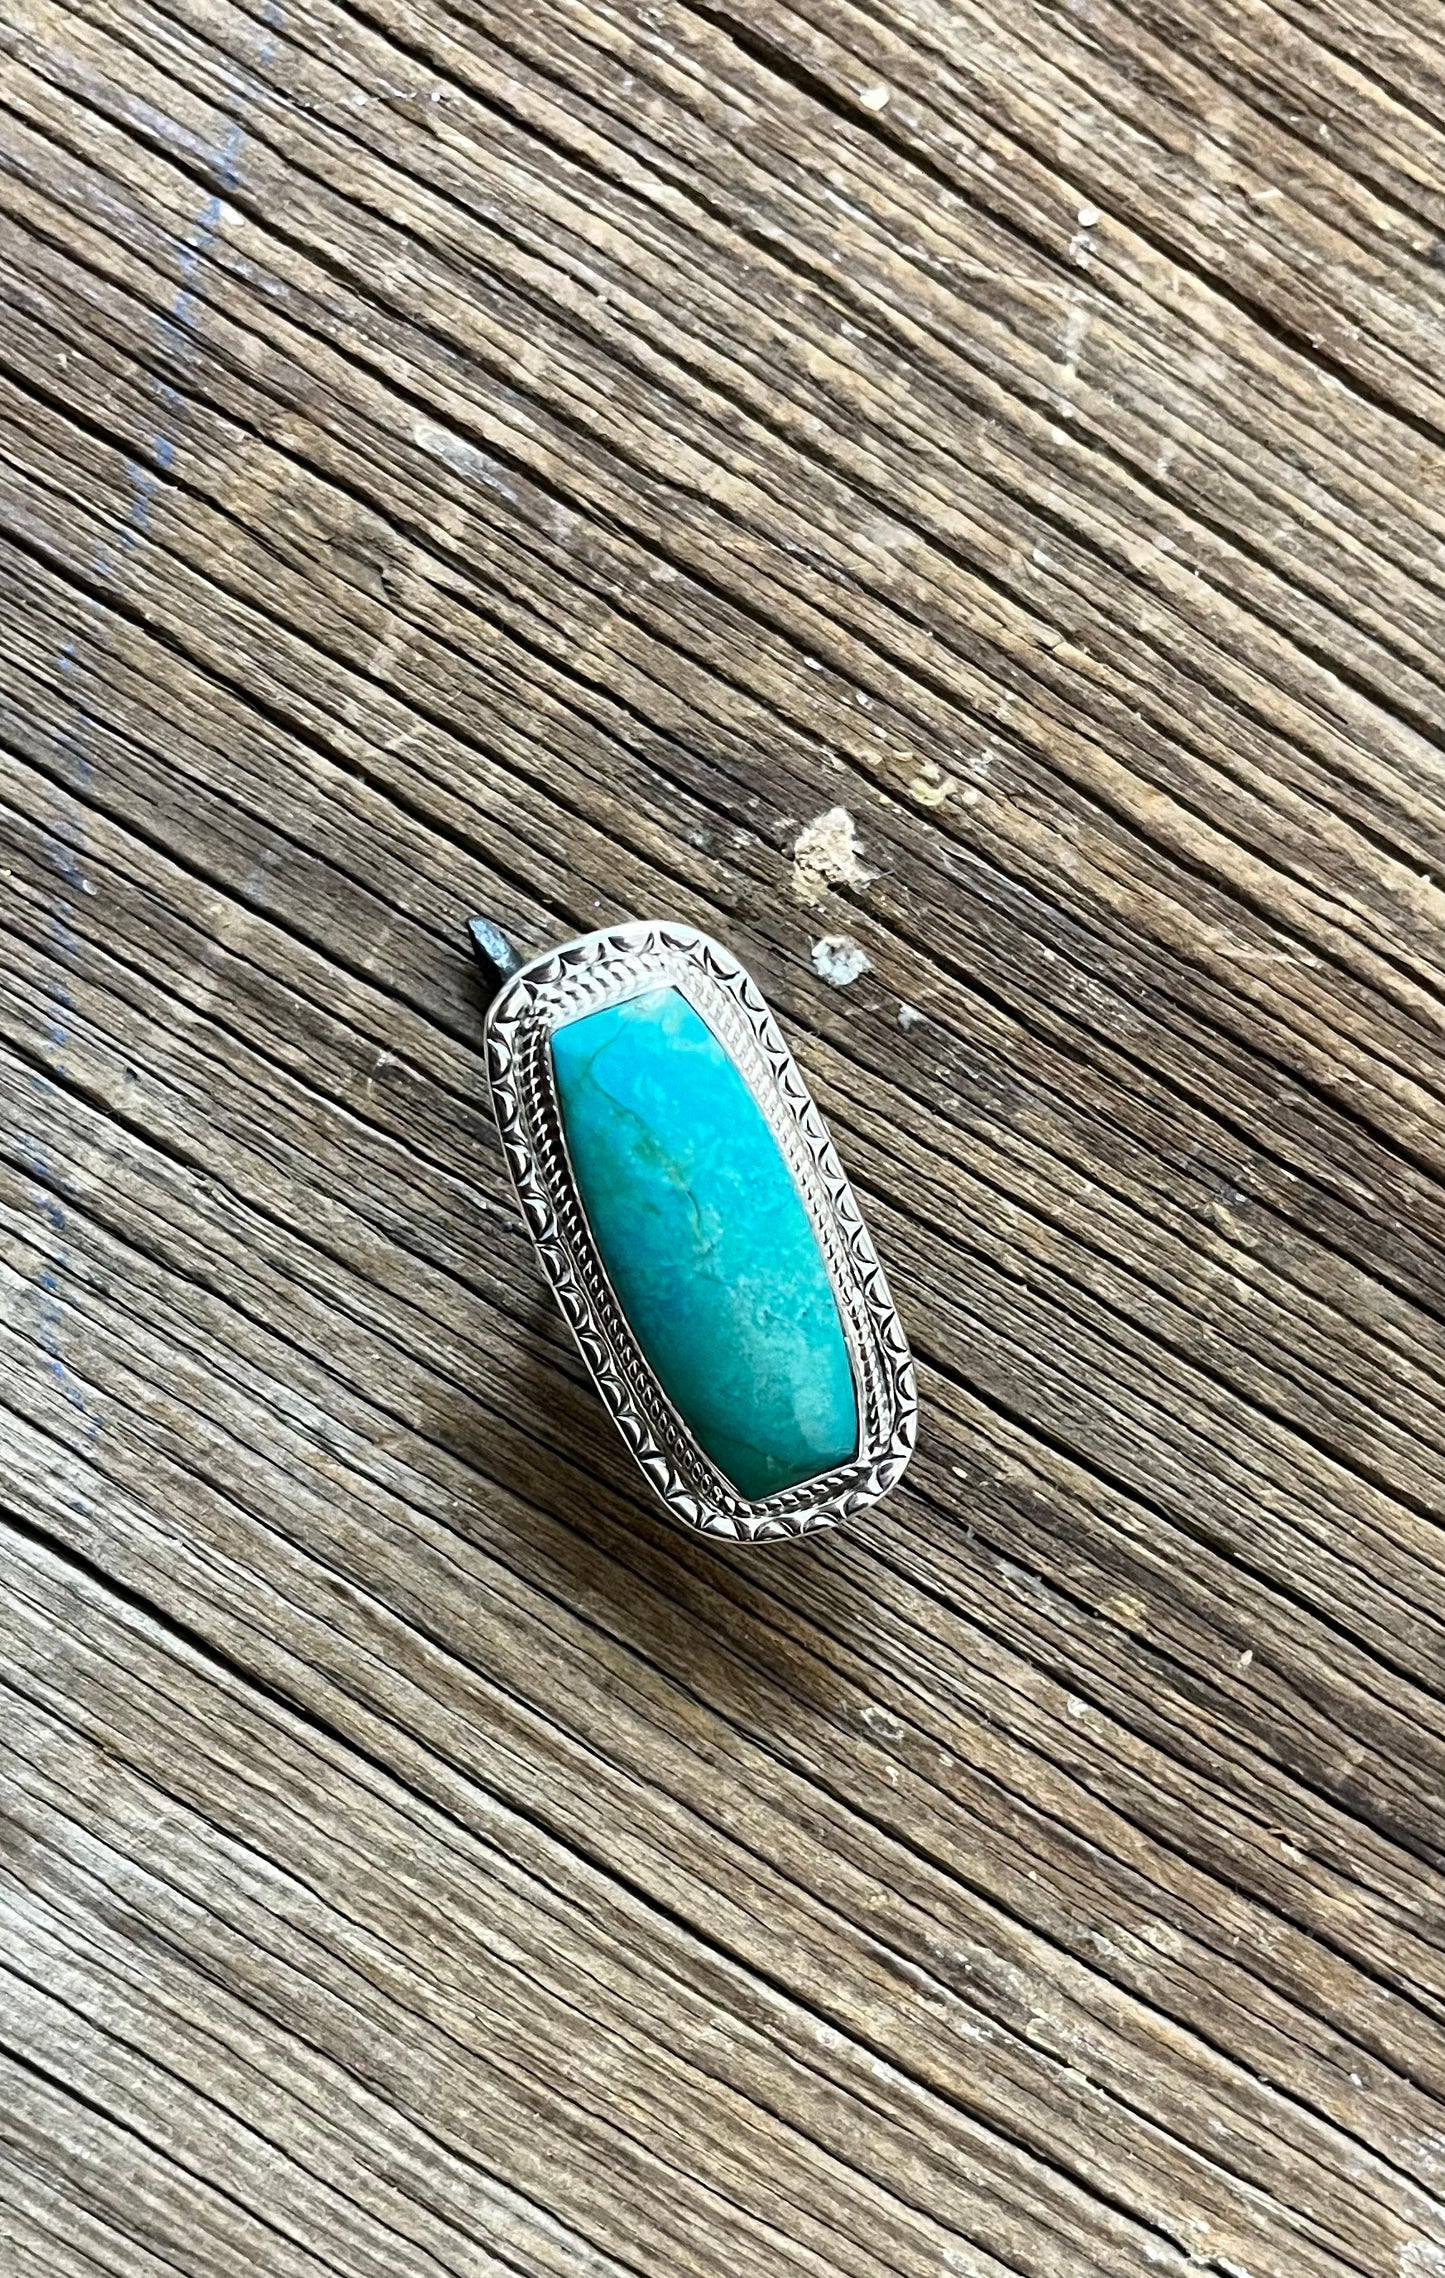 Big Old Turquoise Rectangle Ring